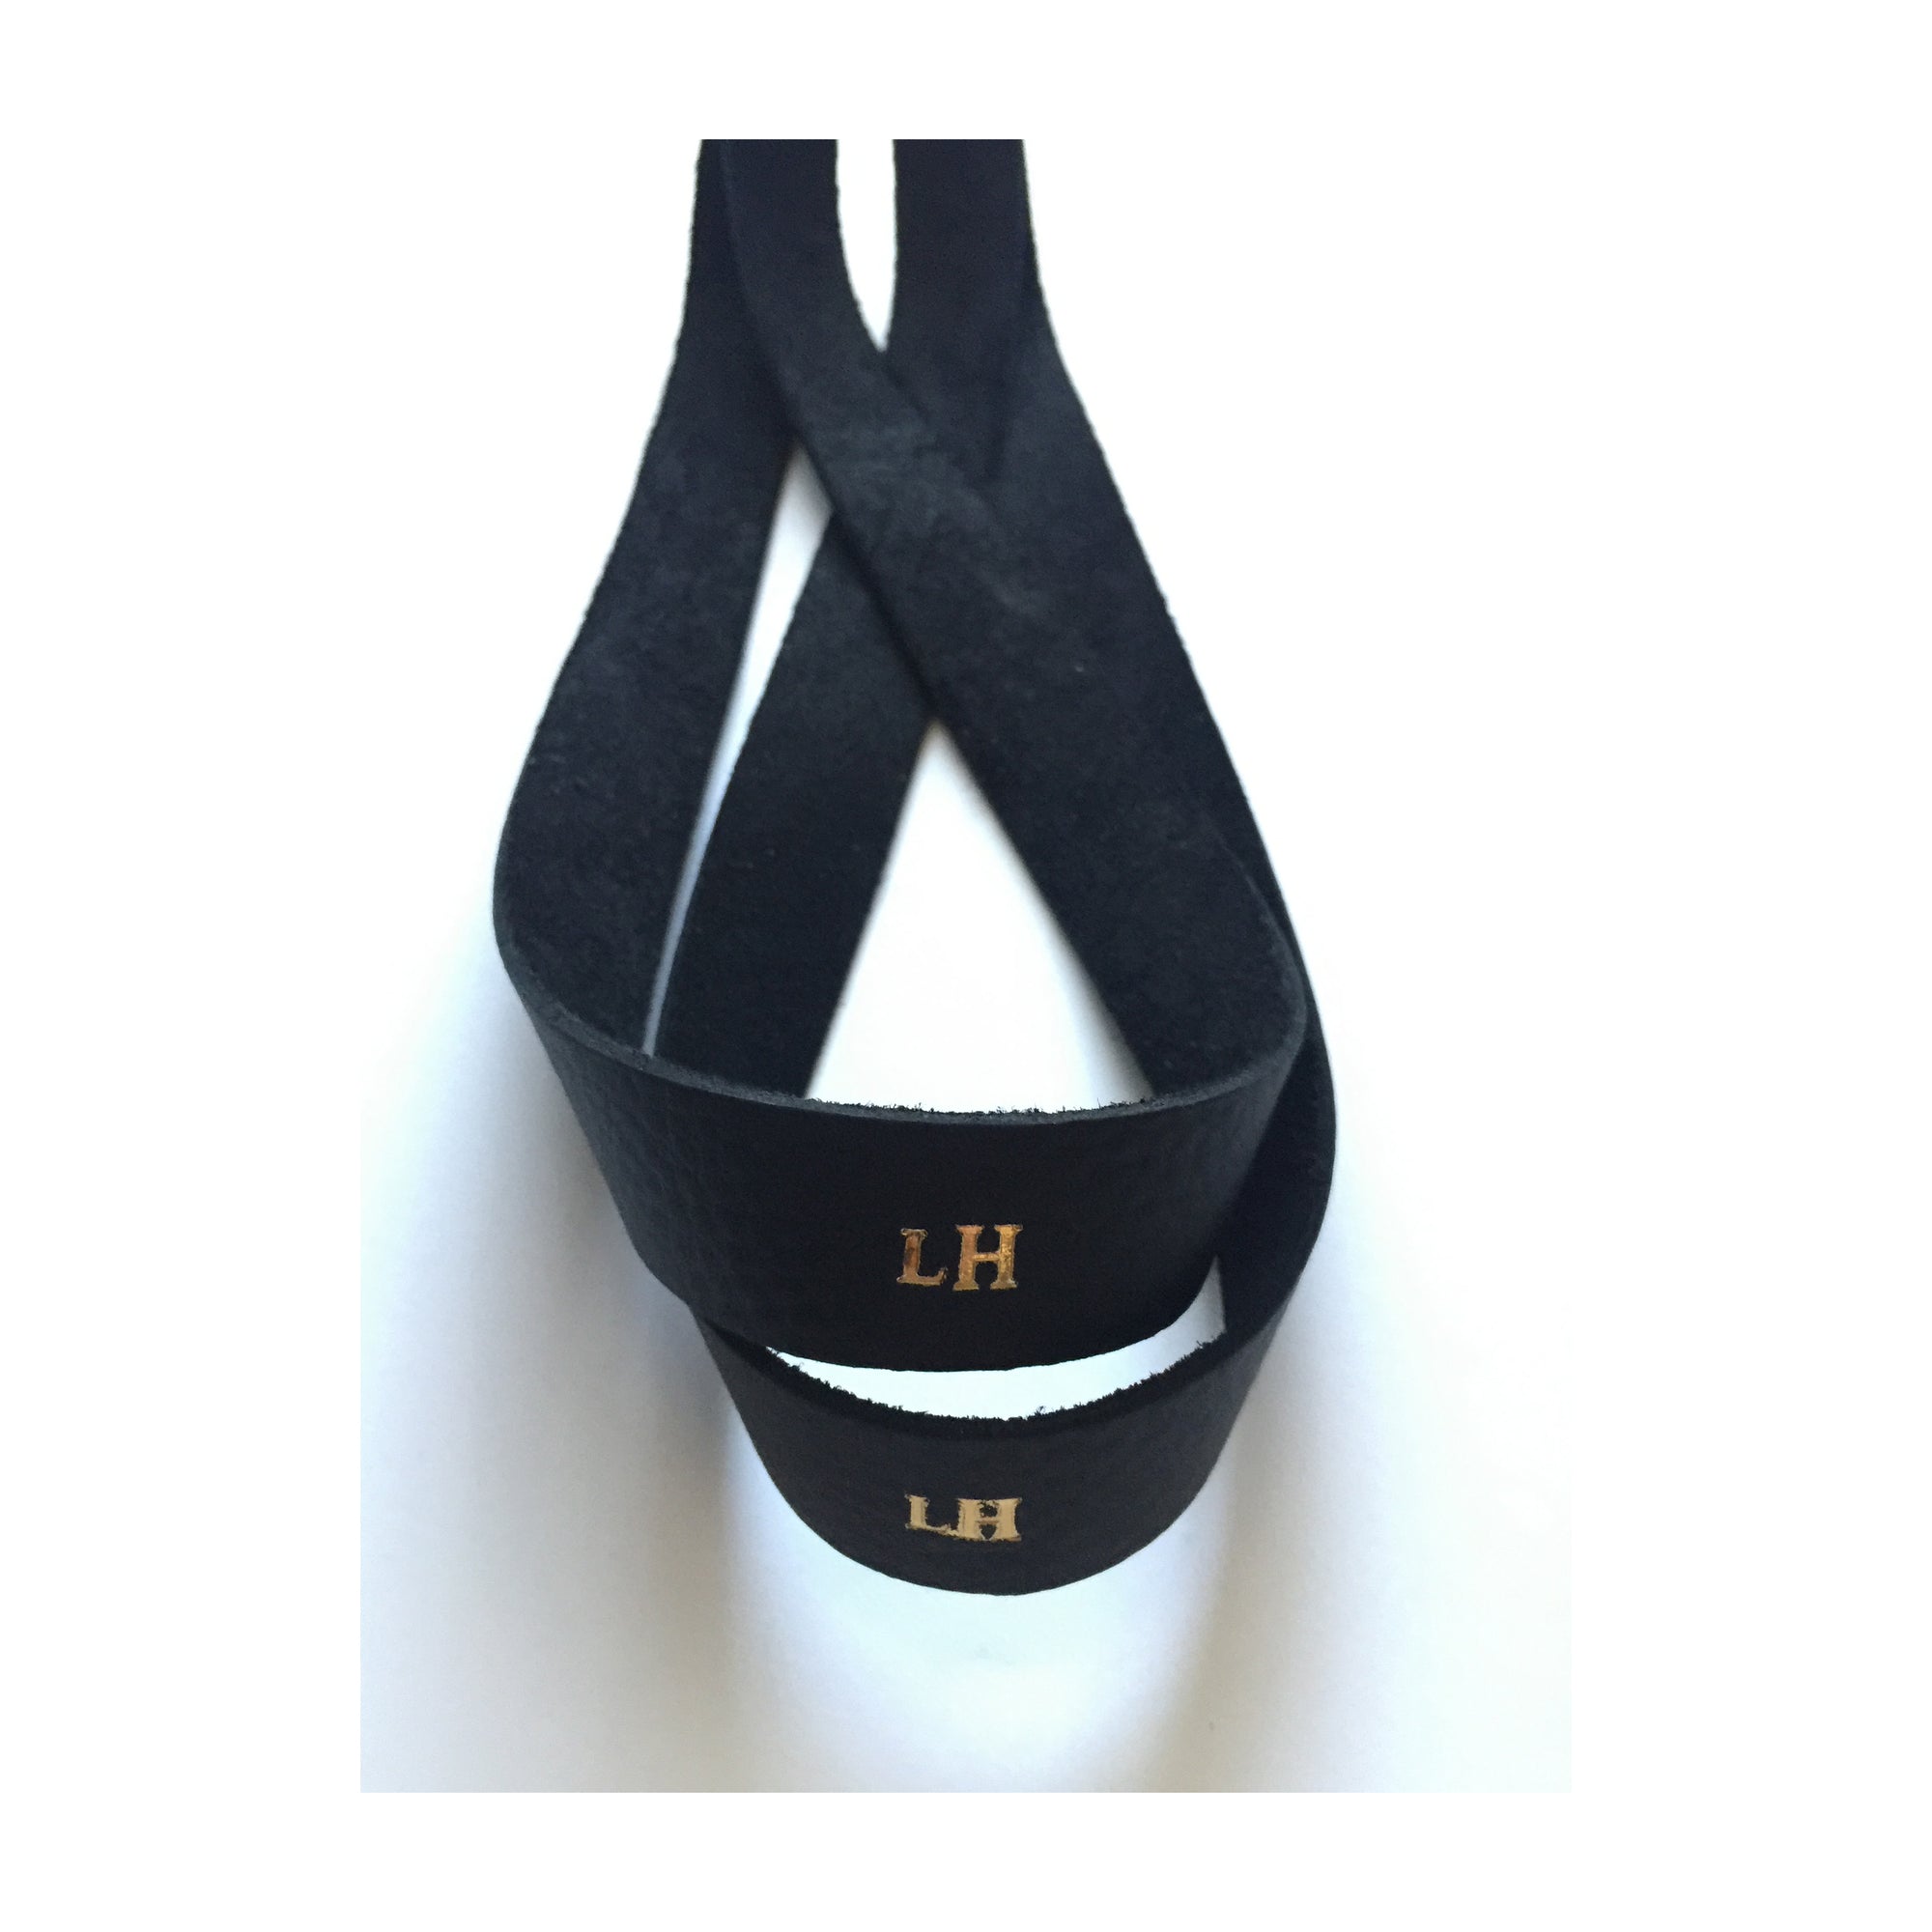 LIN8 Australia's bespoke luxury leather goods. Genuine leather gym lifting pulling straps for bodybuilding, gym, crossfit, olympic weightlifting, powerlifting, deadlift, barbell row, dumbbell row